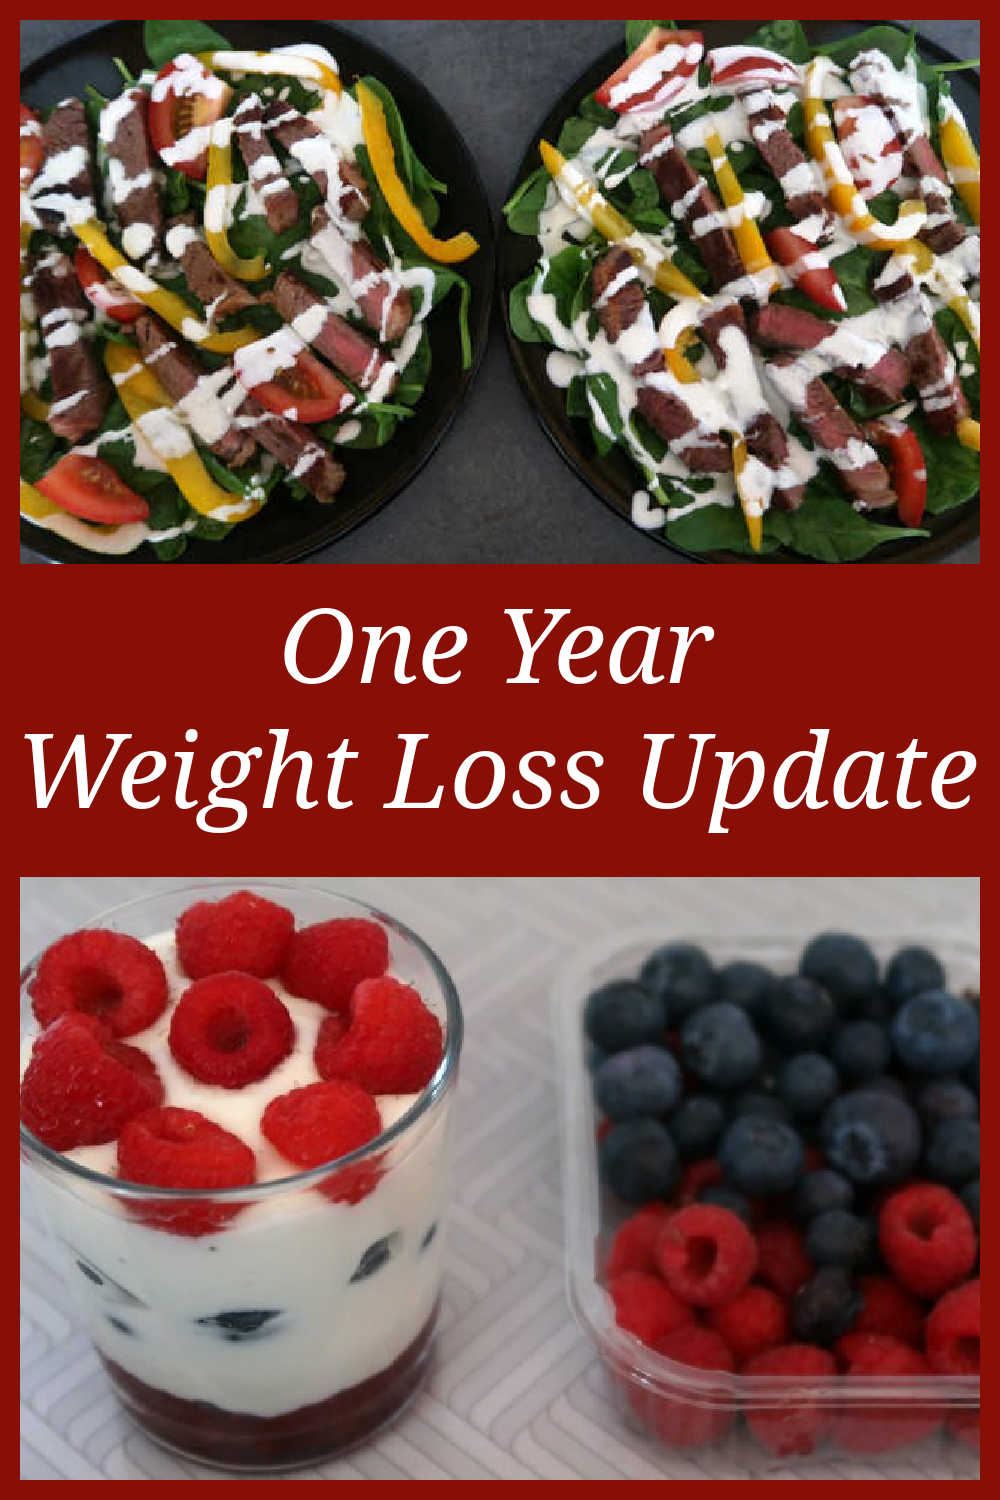 My Weight Loss Journey - 1 Year Update Of How I've Lost Weight And Kept It Off - A look at a typical day of meals & video chatting you through my thoughts of this milestone.